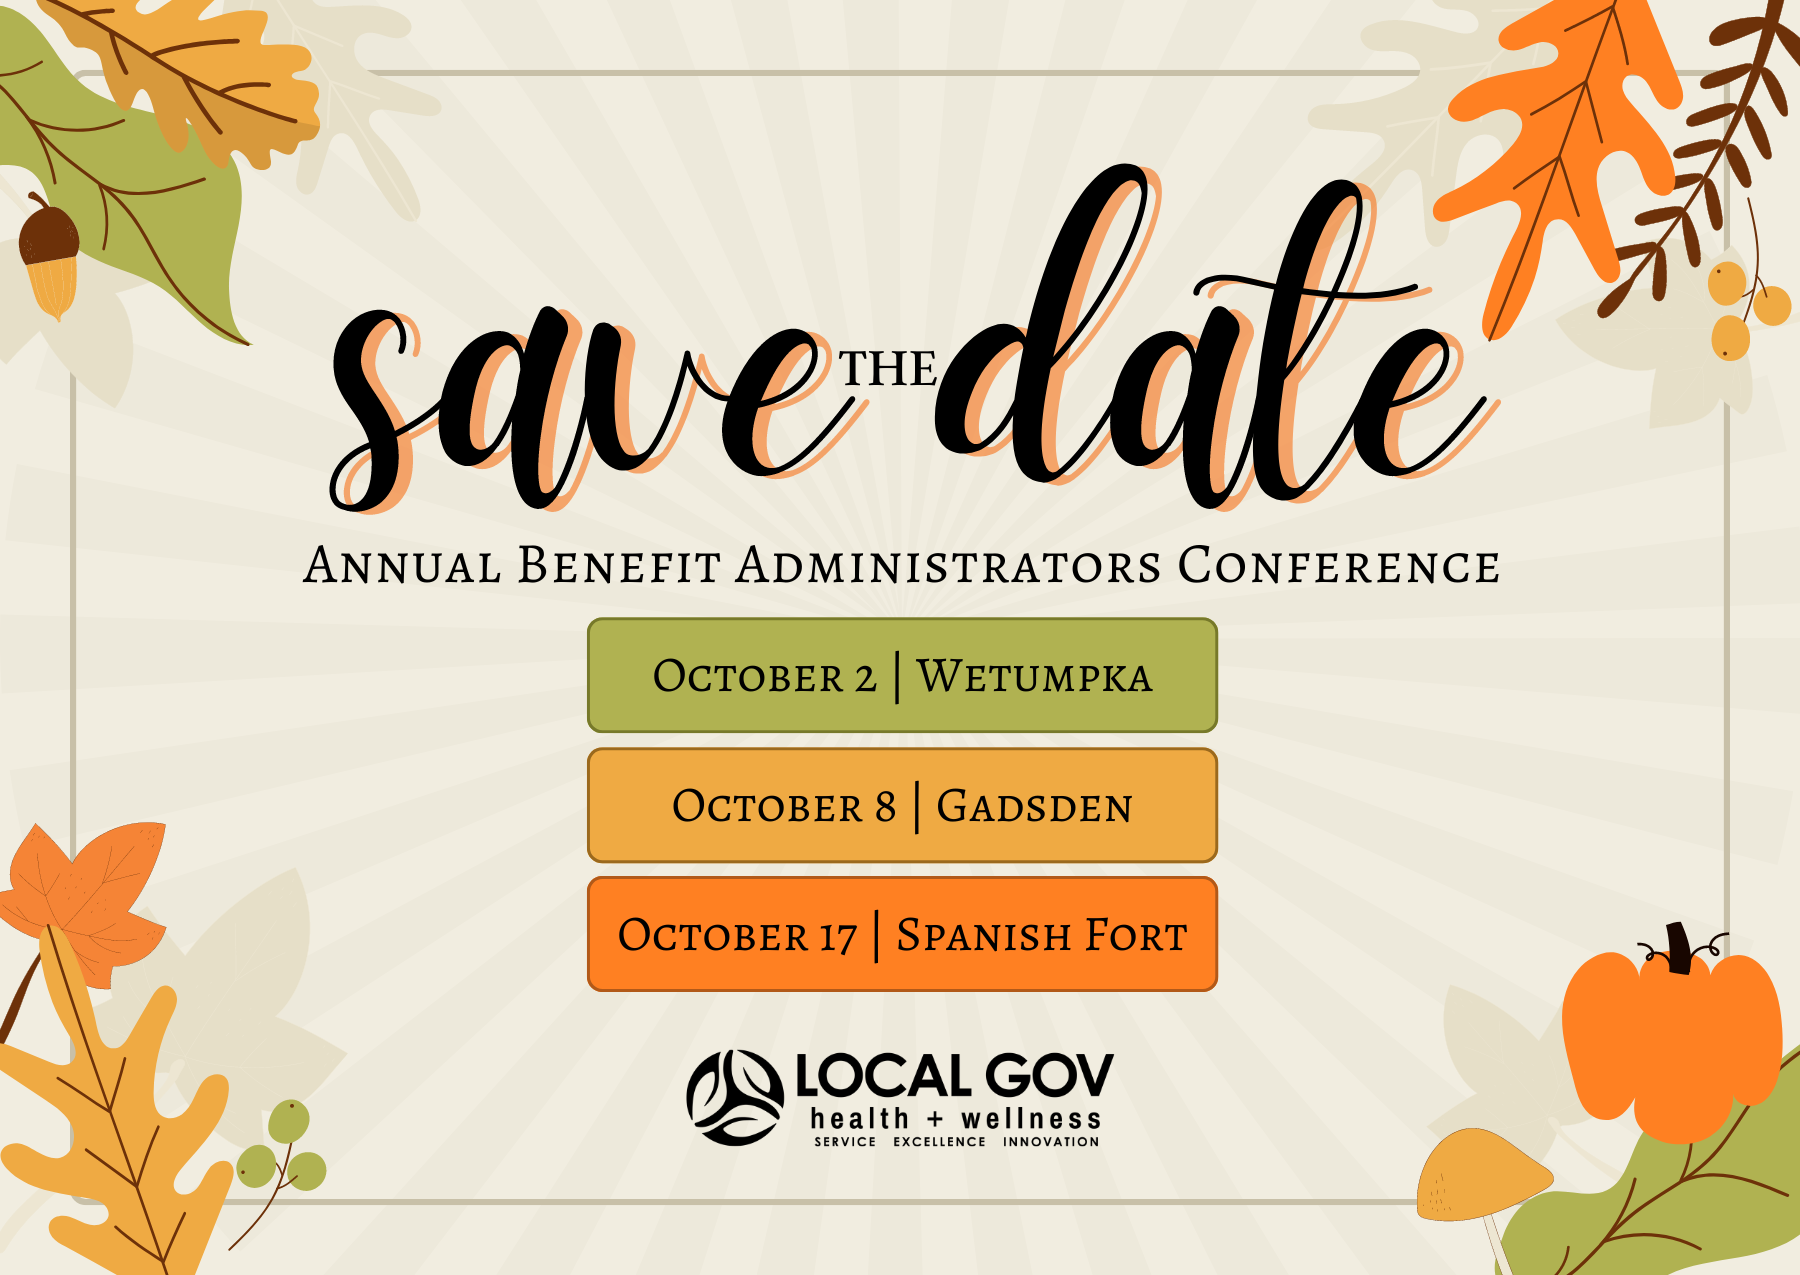 Save the Date postcard with fall colors and upcoming conference dates.